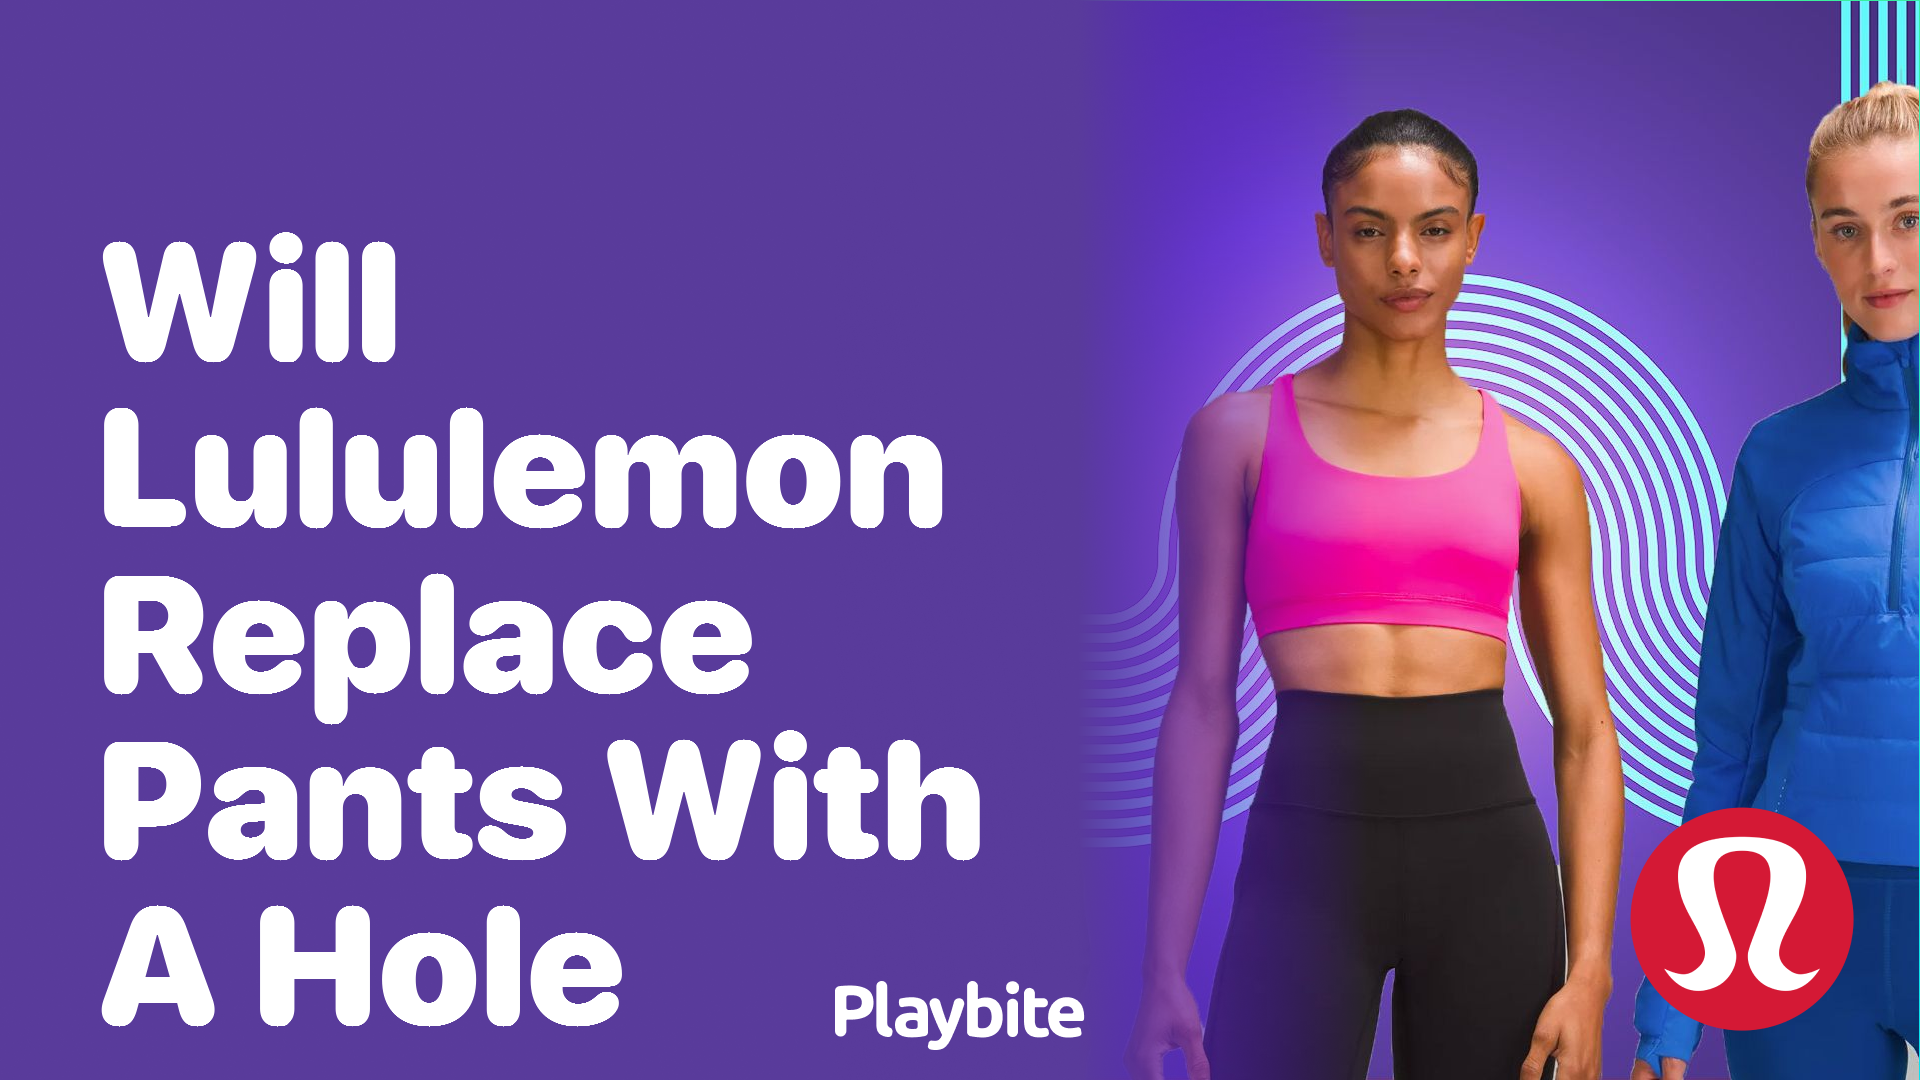 Will Lululemon Replace Pants with a Hole? - Playbite